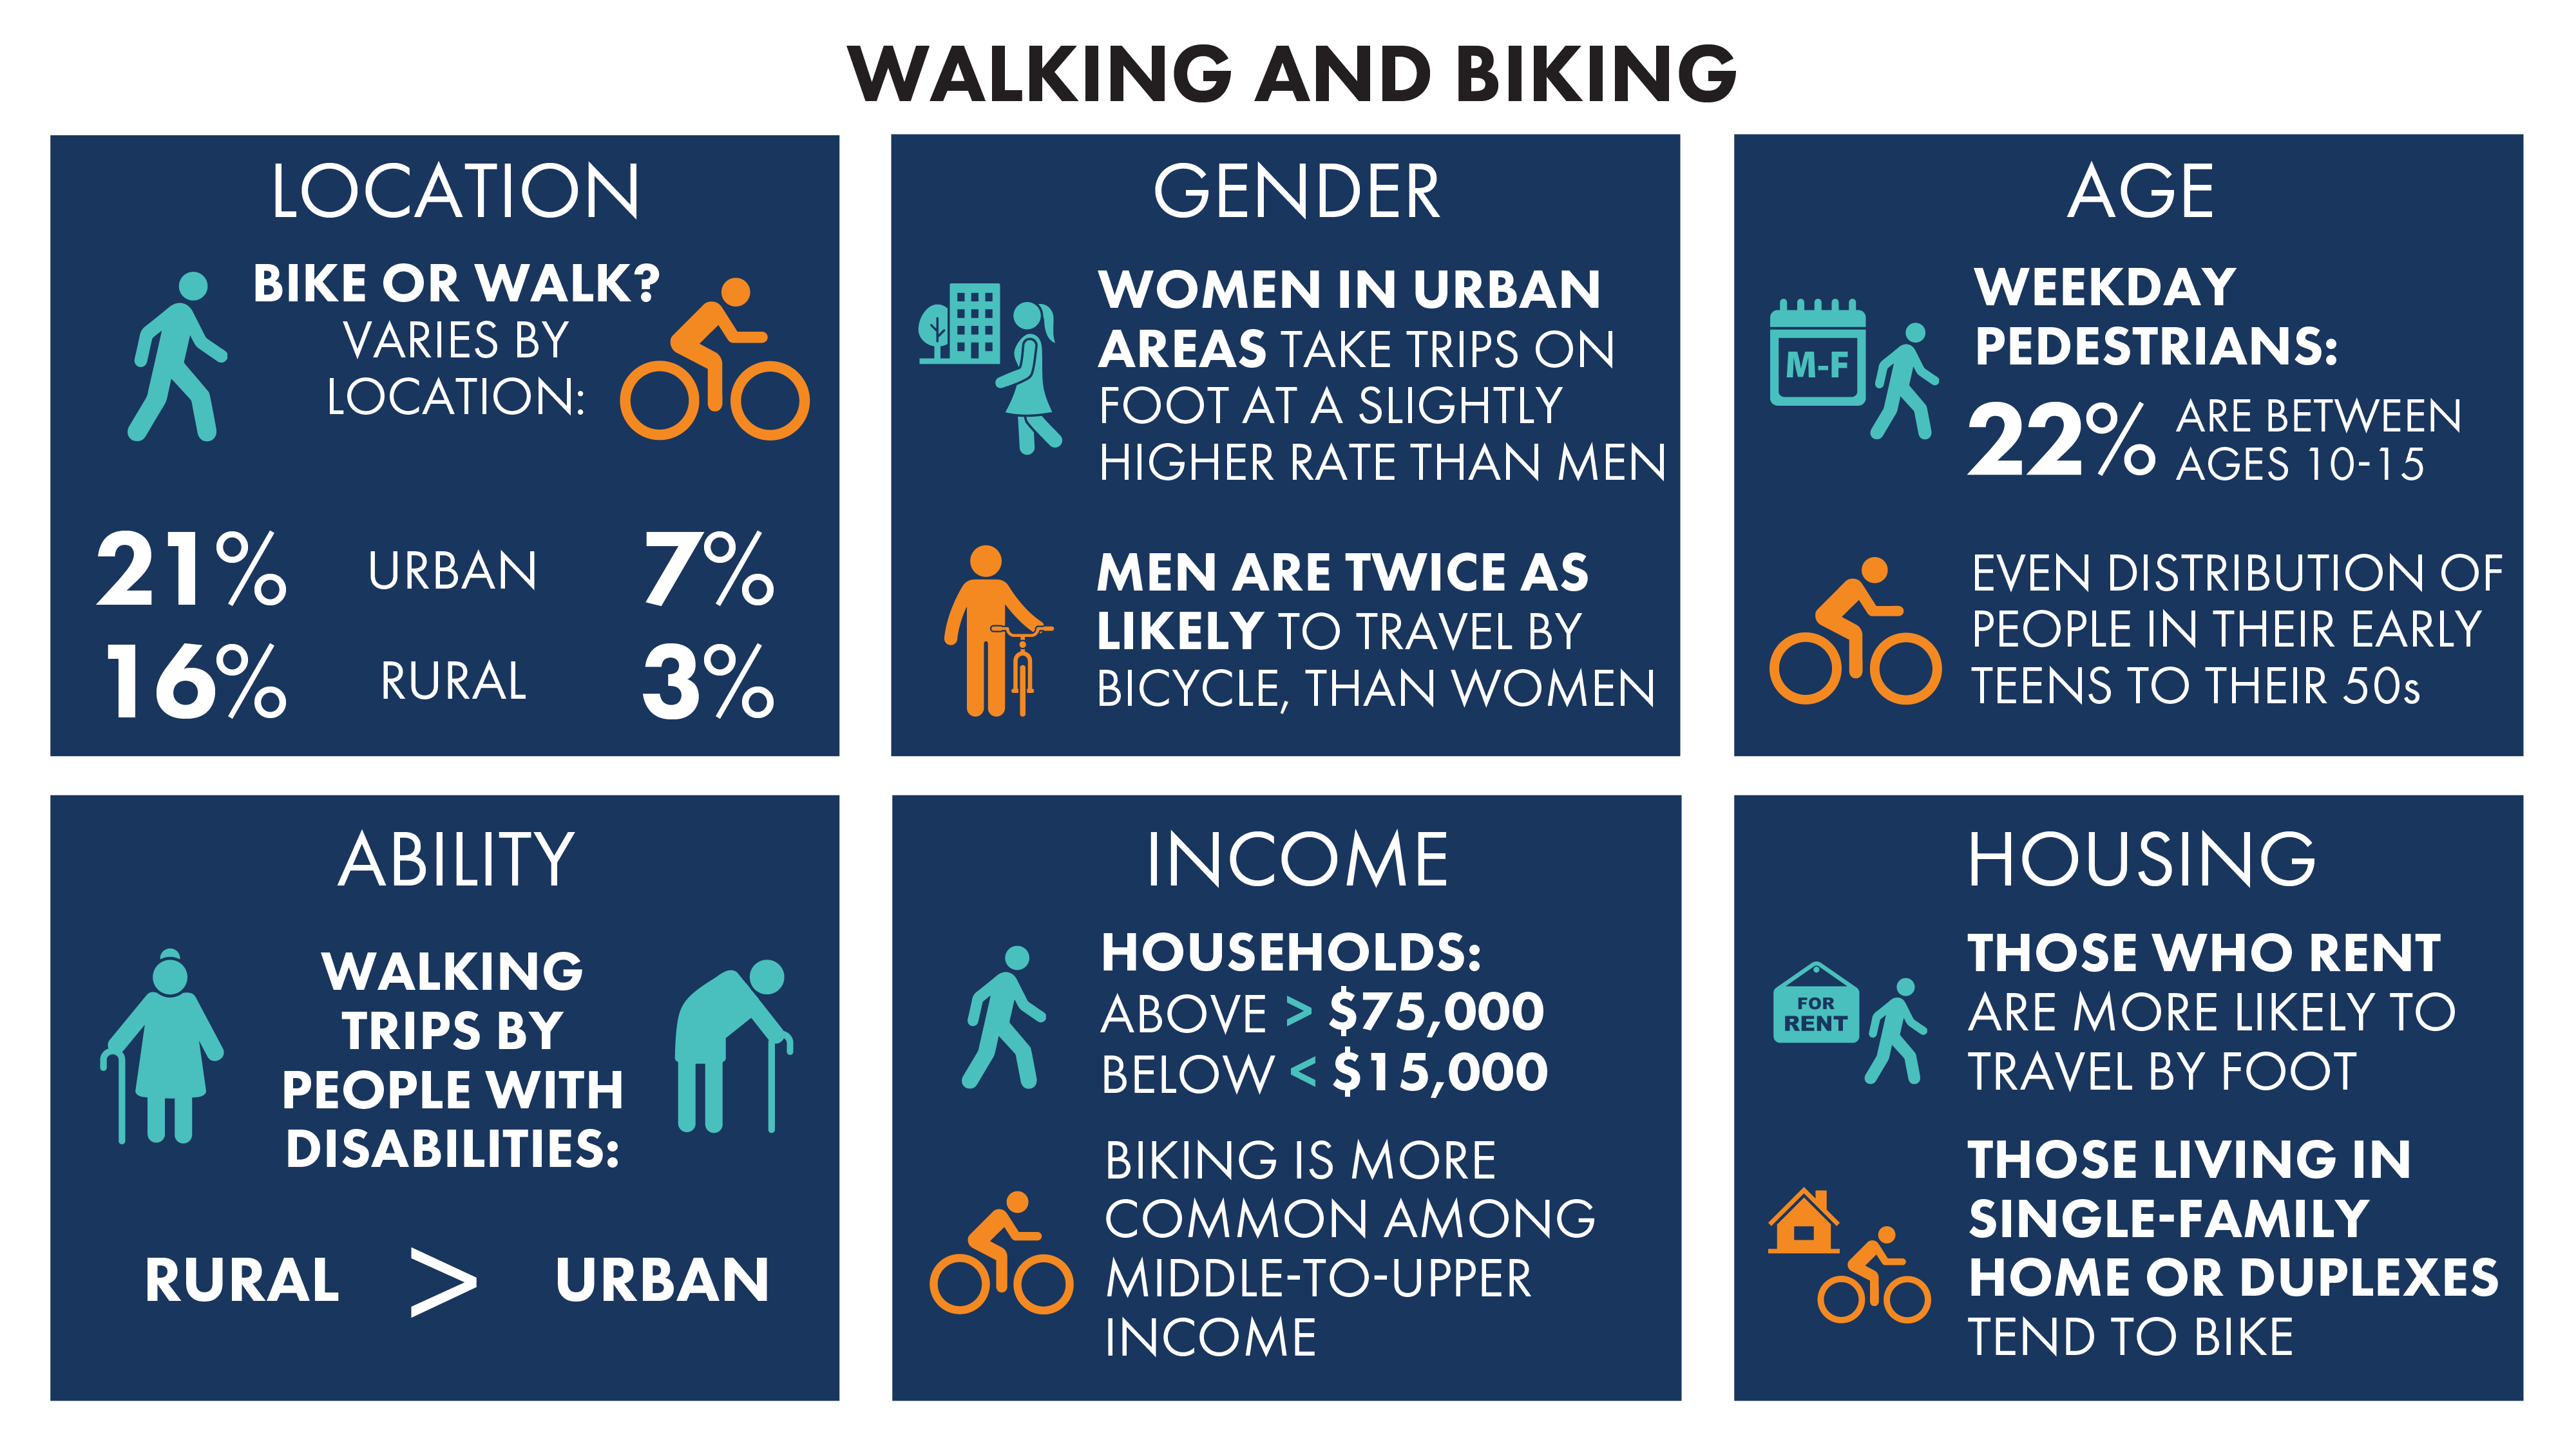 Statistics of Oregonians walking and biking showing differences in location, gender, age ability, income and housing